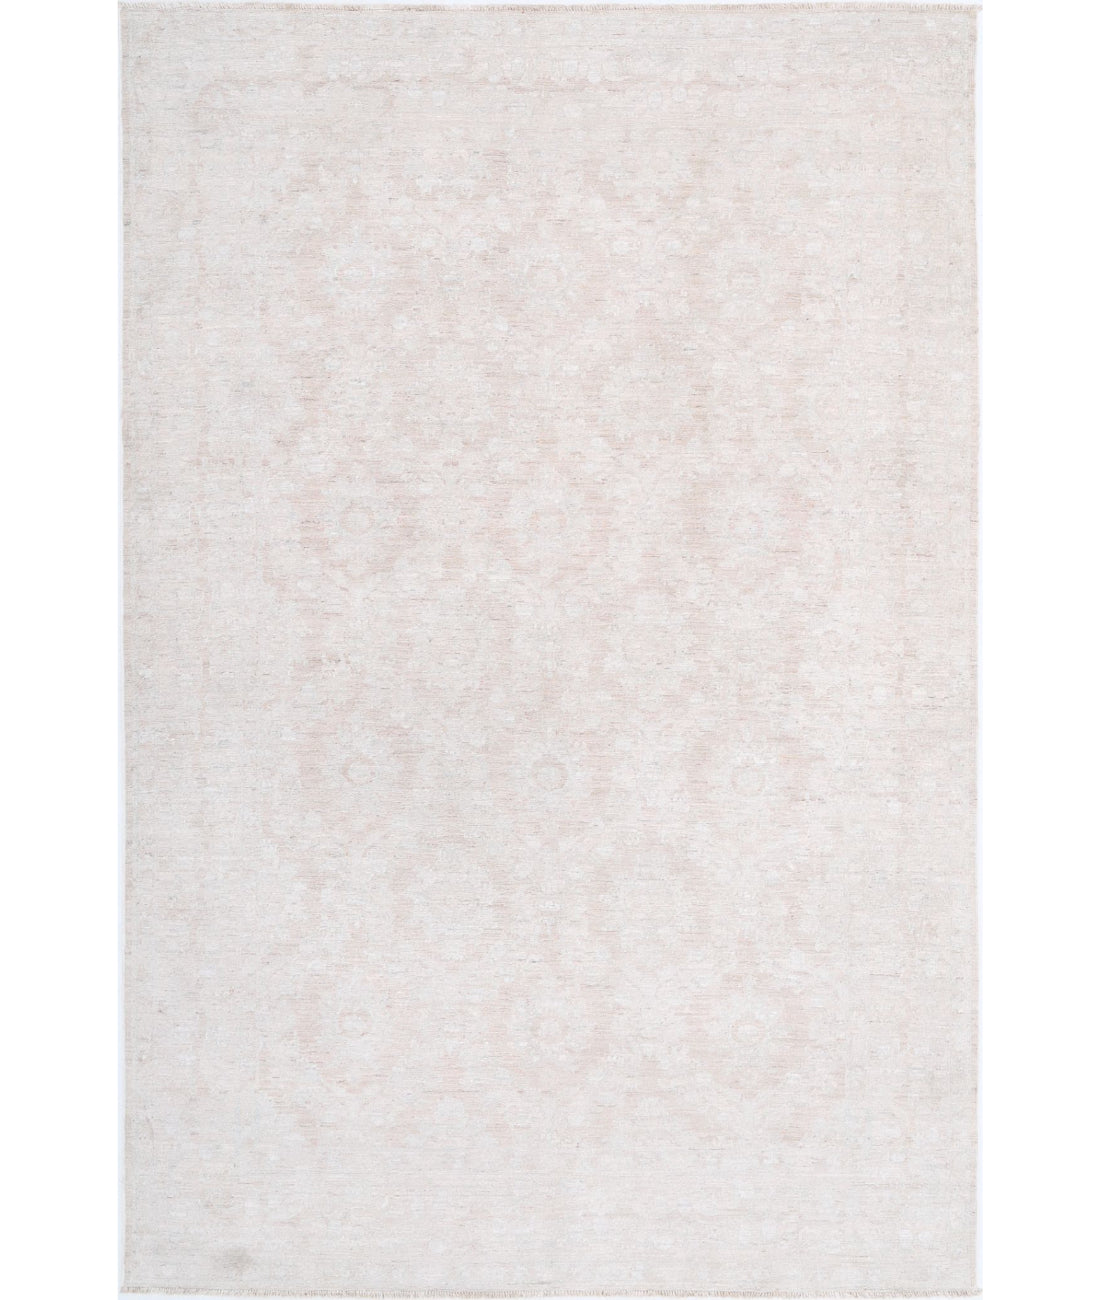 Hand Knotted Serenity Wool Rug - 5'10'' x 8'10'' 5'10'' x 8'10'' (175 X 265) / Grey / Ivory